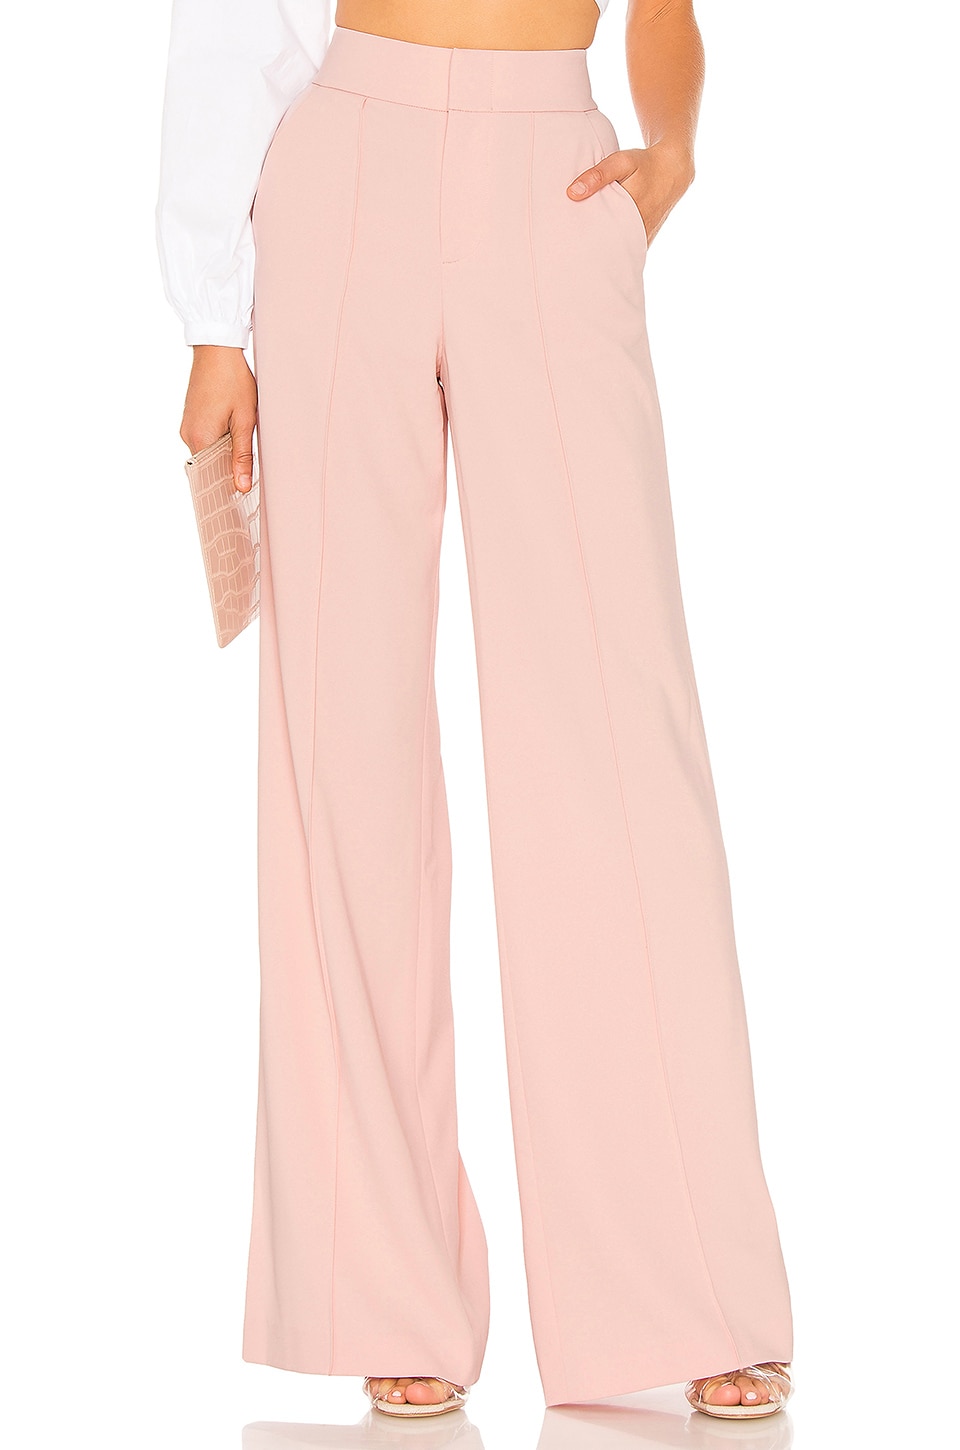 Alice + Olivia Dylan High Waisted Fitted Pant in Blush | REVOLVE